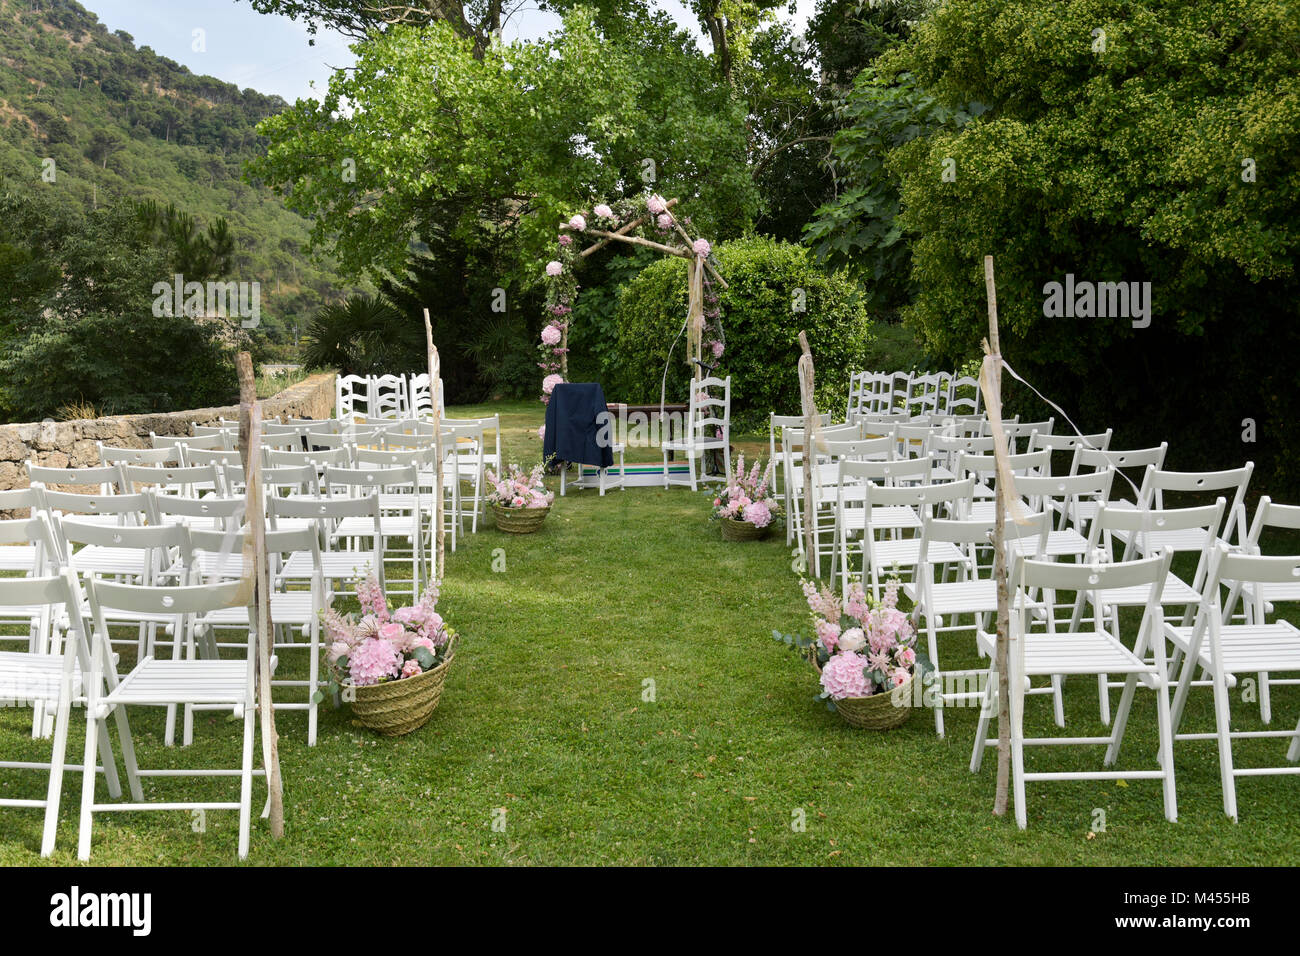 a view of the scene of an open-air wedding ceremony, with some rows of white folding chairs and some arrangements of different pale pink flowers, and  Stock Photo